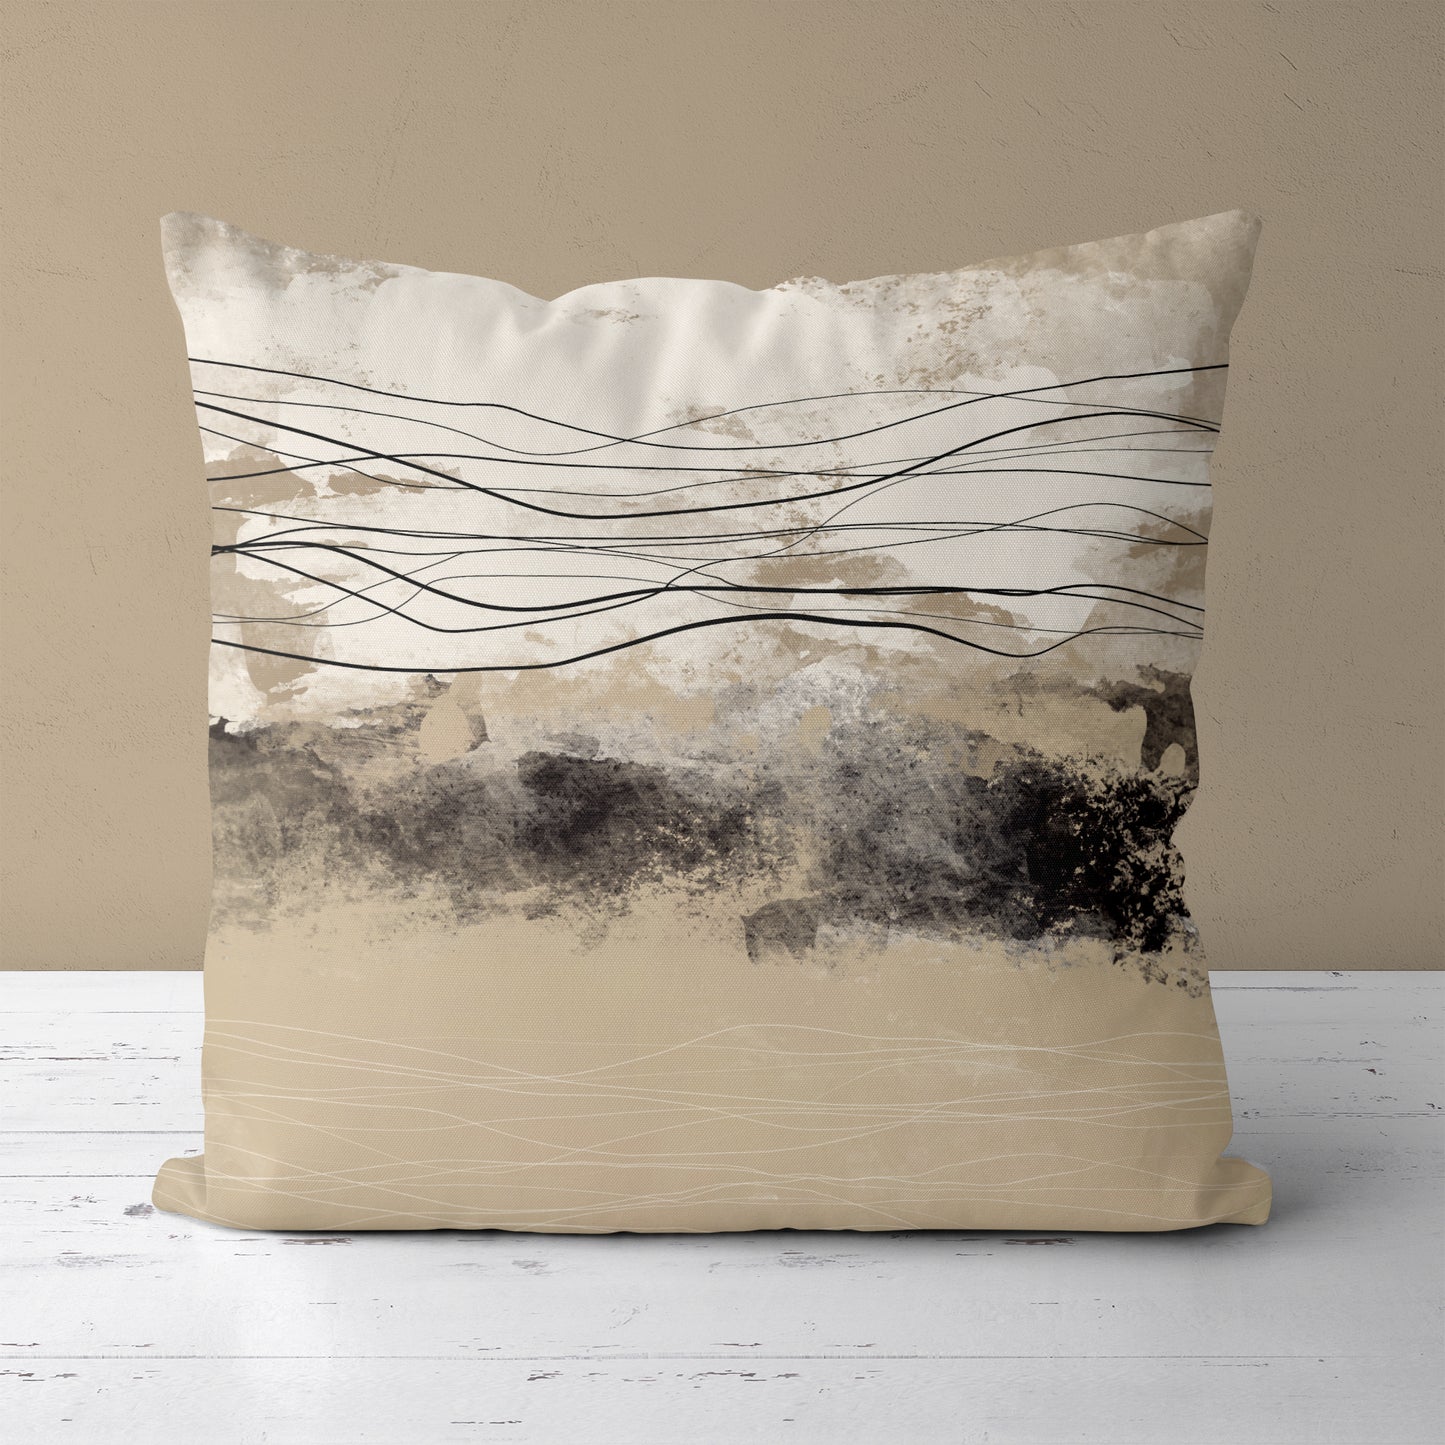 Throw Pillow with Modern Abstract Beige Art